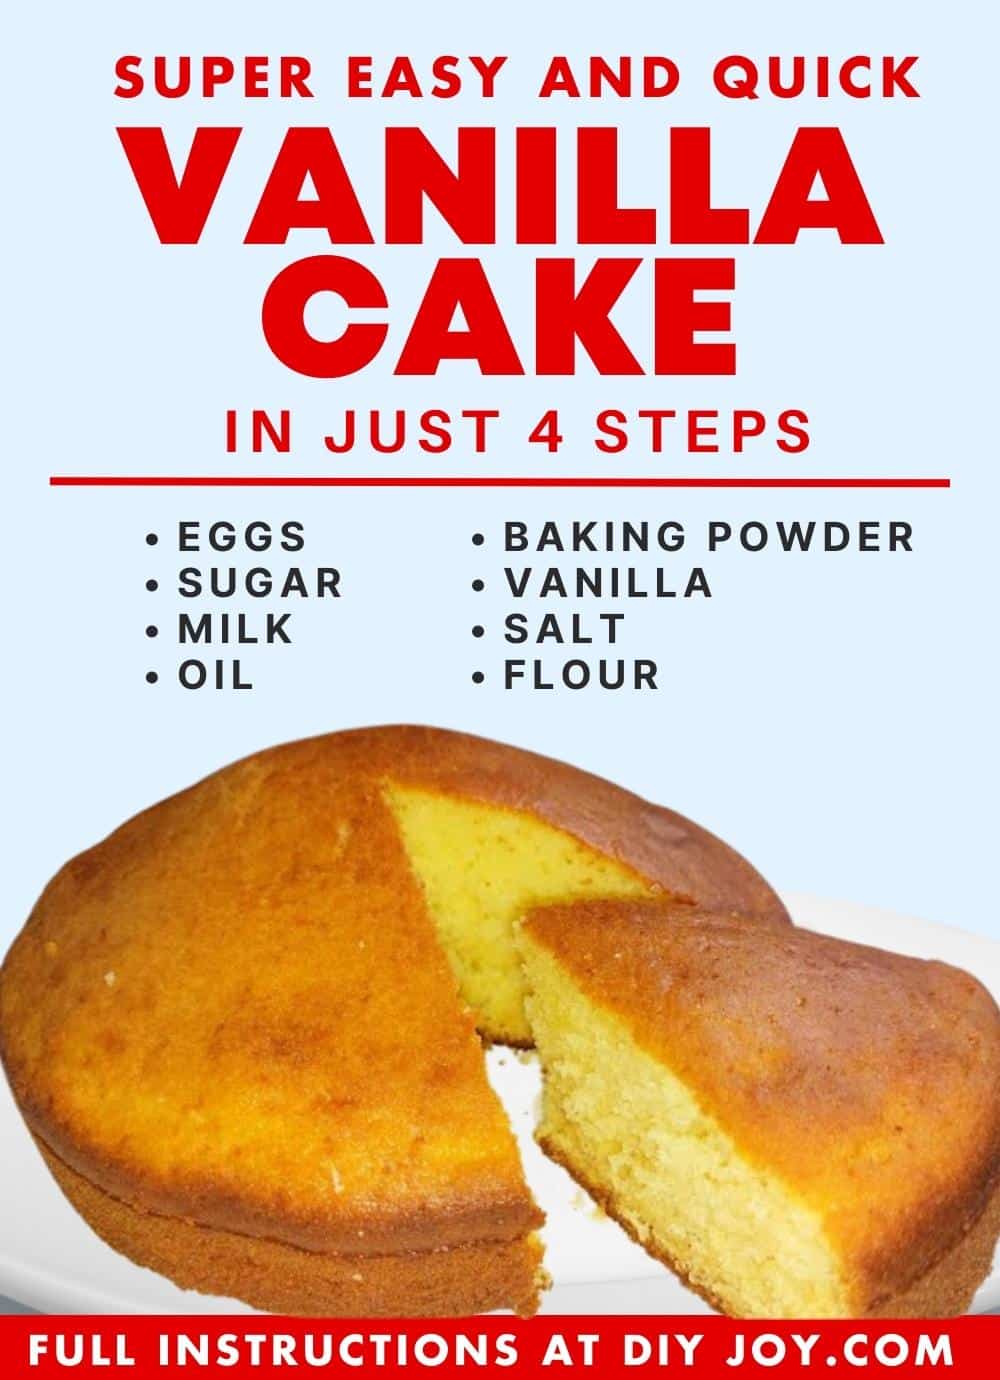 Super Easy and Quick Vanilla Cake in 4 Steps